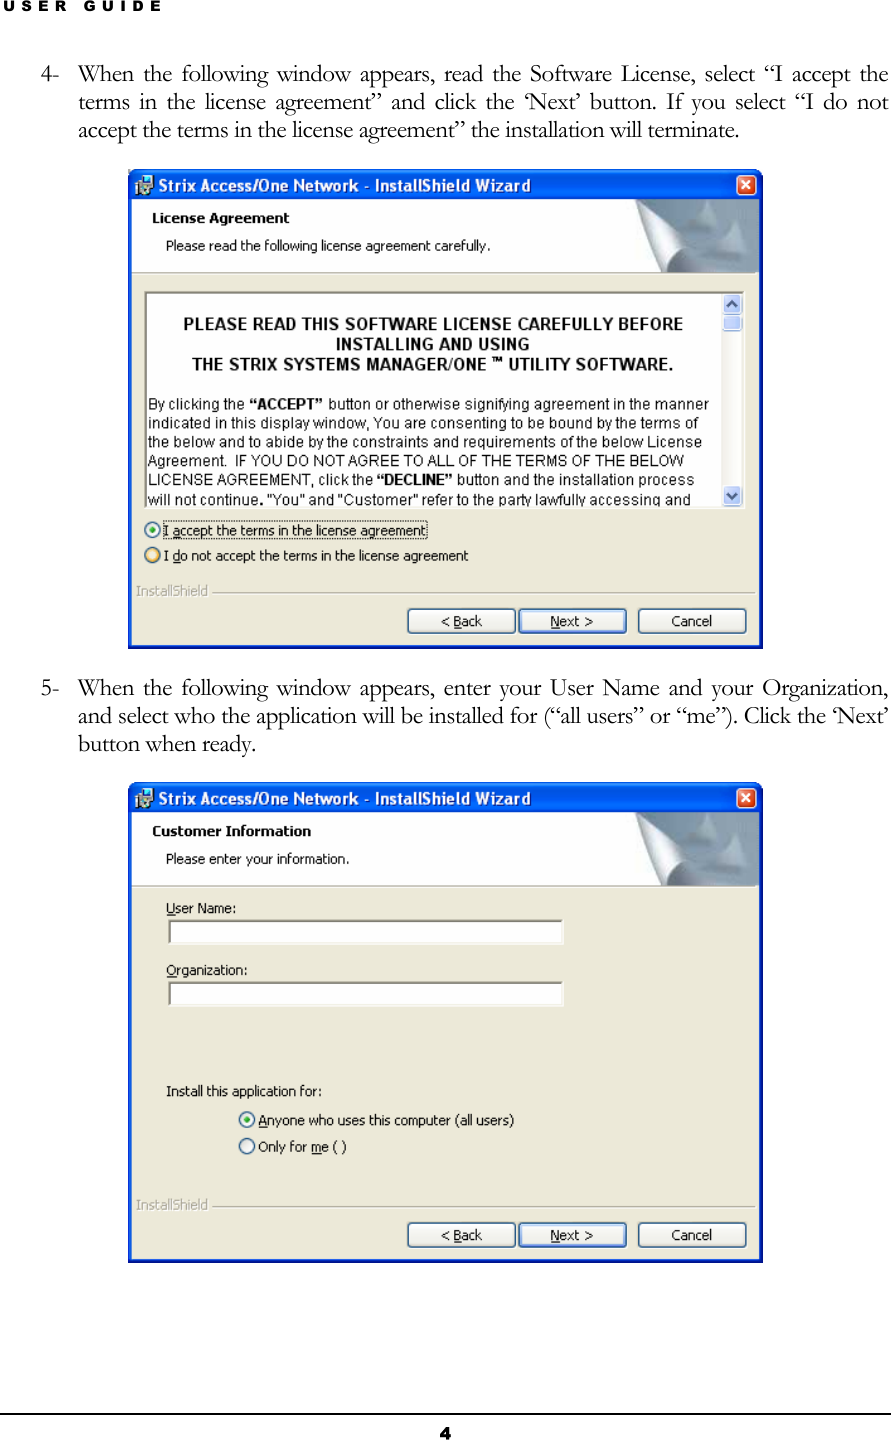 USER GUIDE 4- When the following window appears, read the Software License, select “I accept the terms in the license agreement” and click the ‘Next’ button. If you select “I do not accept the terms in the license agreement” the installation will terminate.  5- When the following window appears, enter your User Name and your Organization, and select who the application will be installed for (“all users” or “me”). Click the ‘Next’ button when ready.    4 